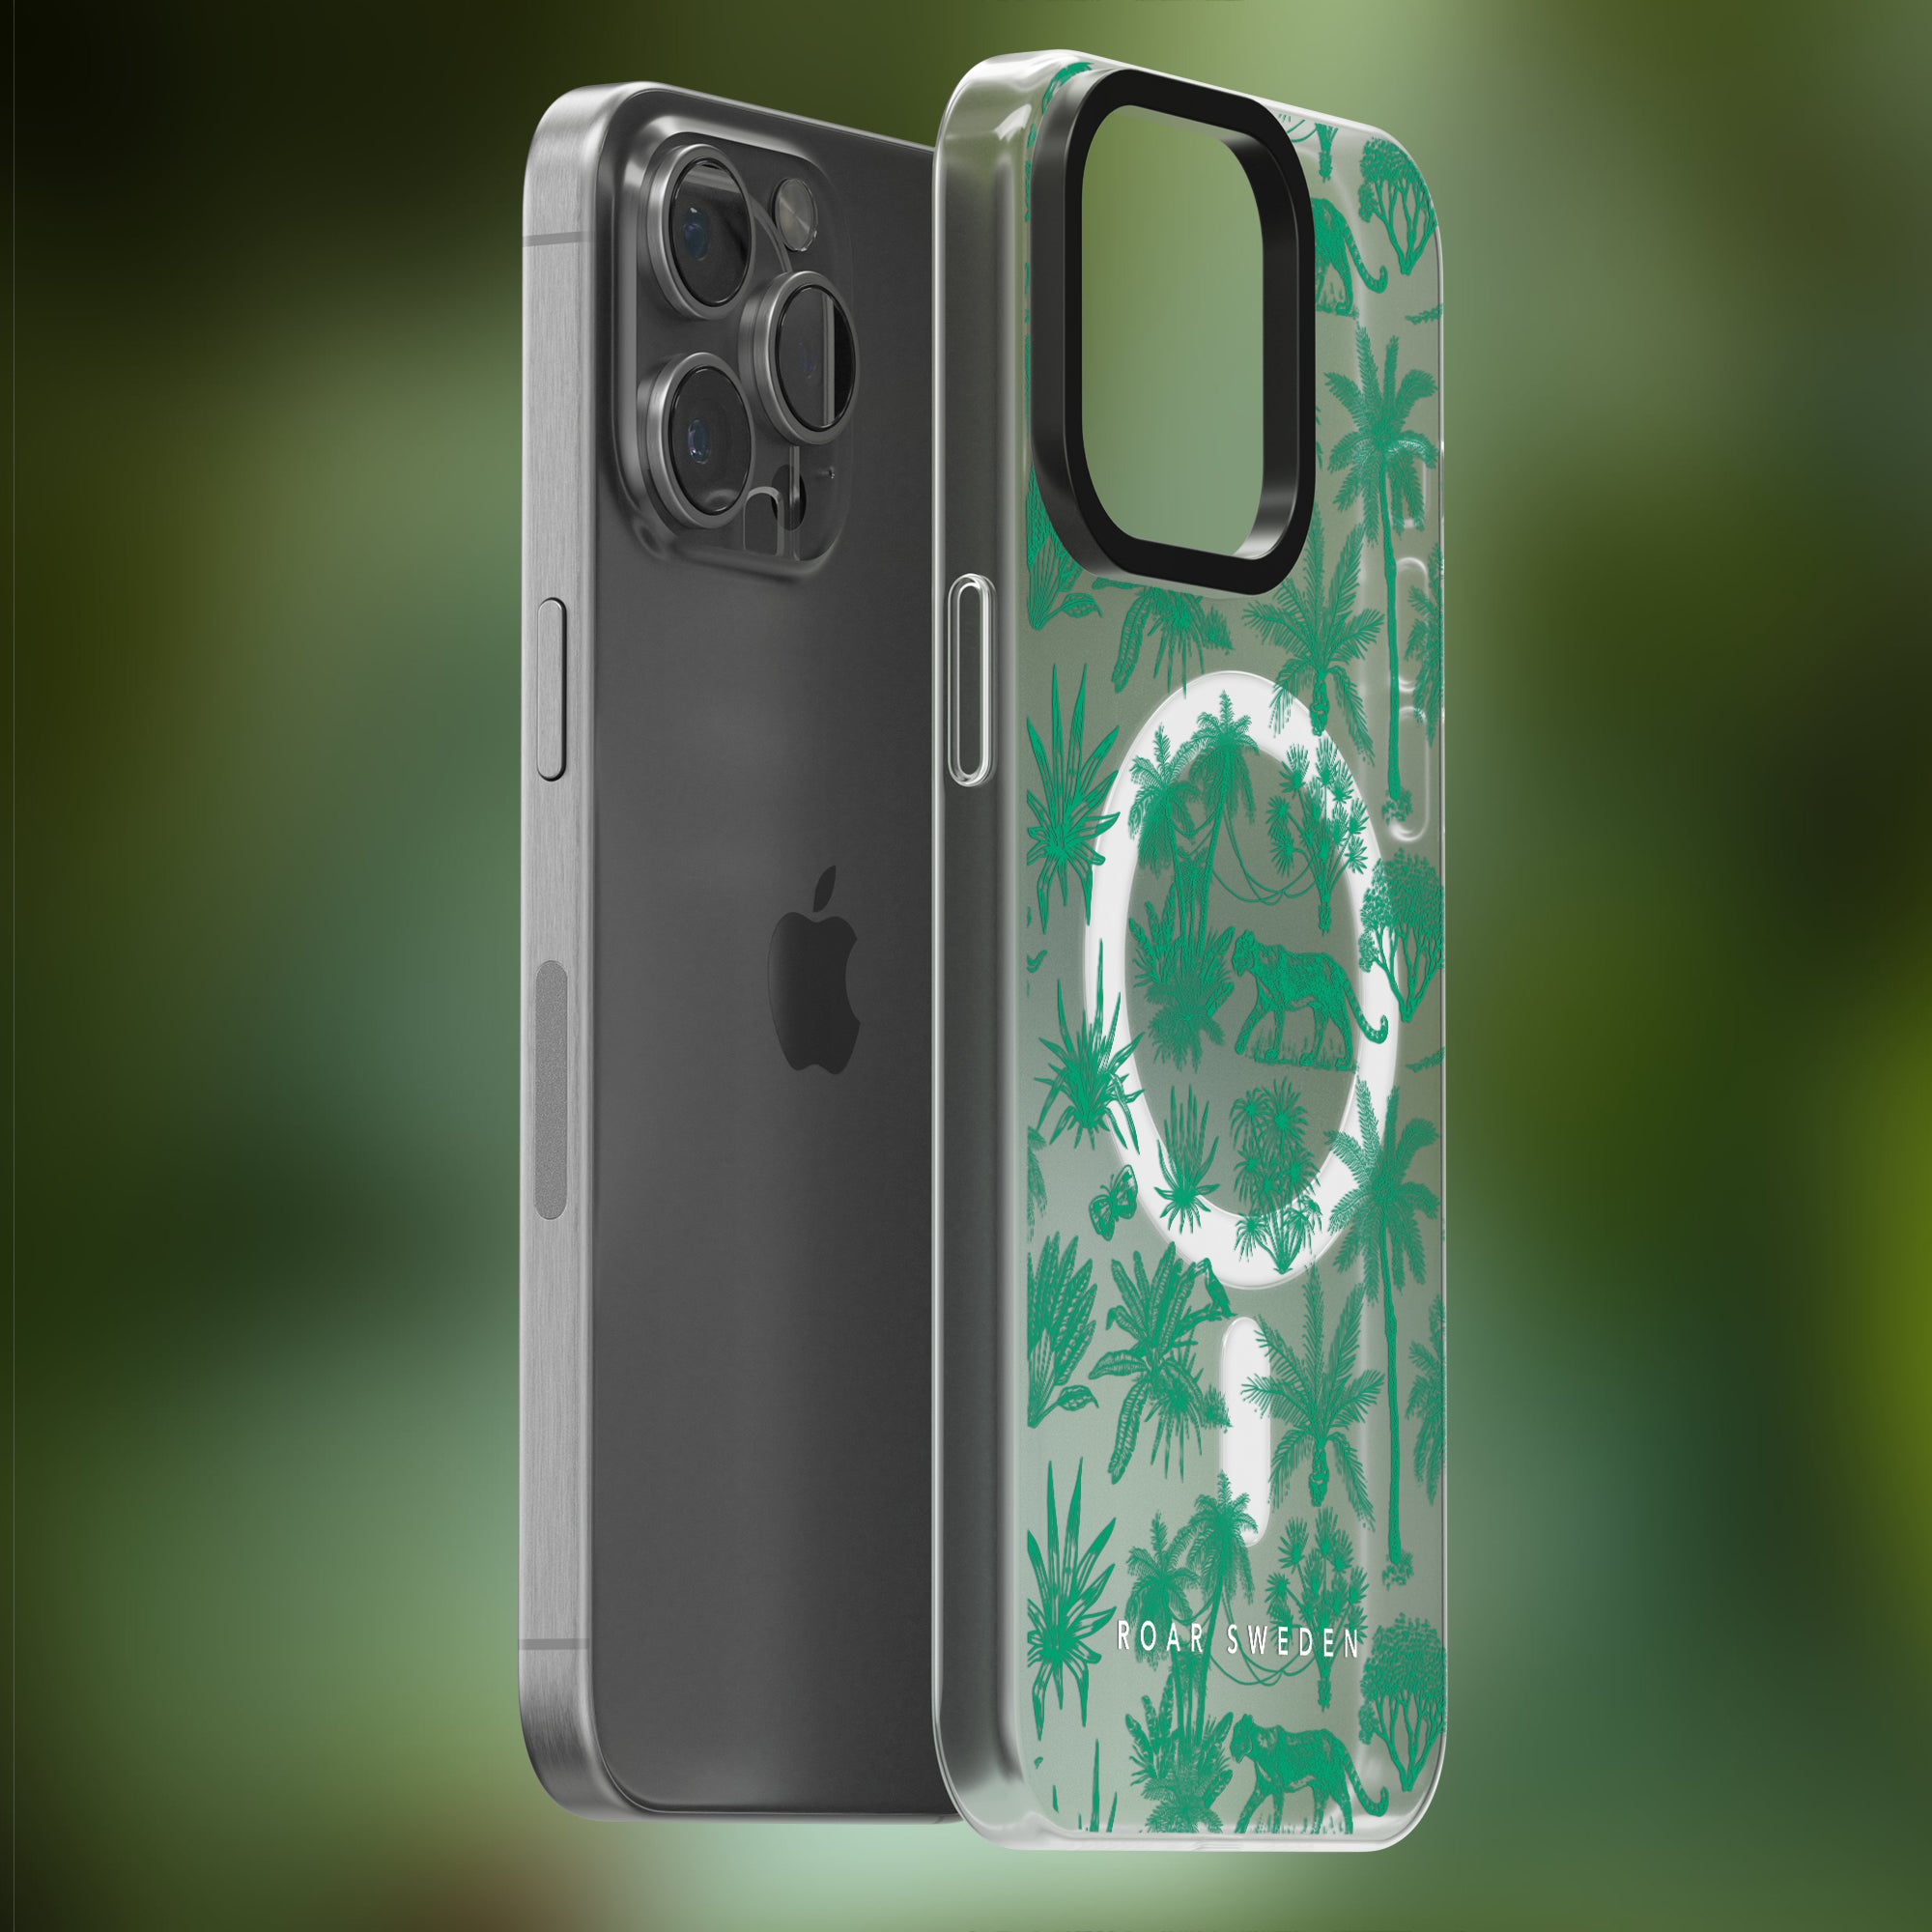 Image shows a sleek smartphone with a gray back next to a Toile De Jouy Mint - MagSafe case adorned with a green jungle pattern and illustrations of animals. The phone case is propped to reveal the back design and the brand "Roar Sweden.